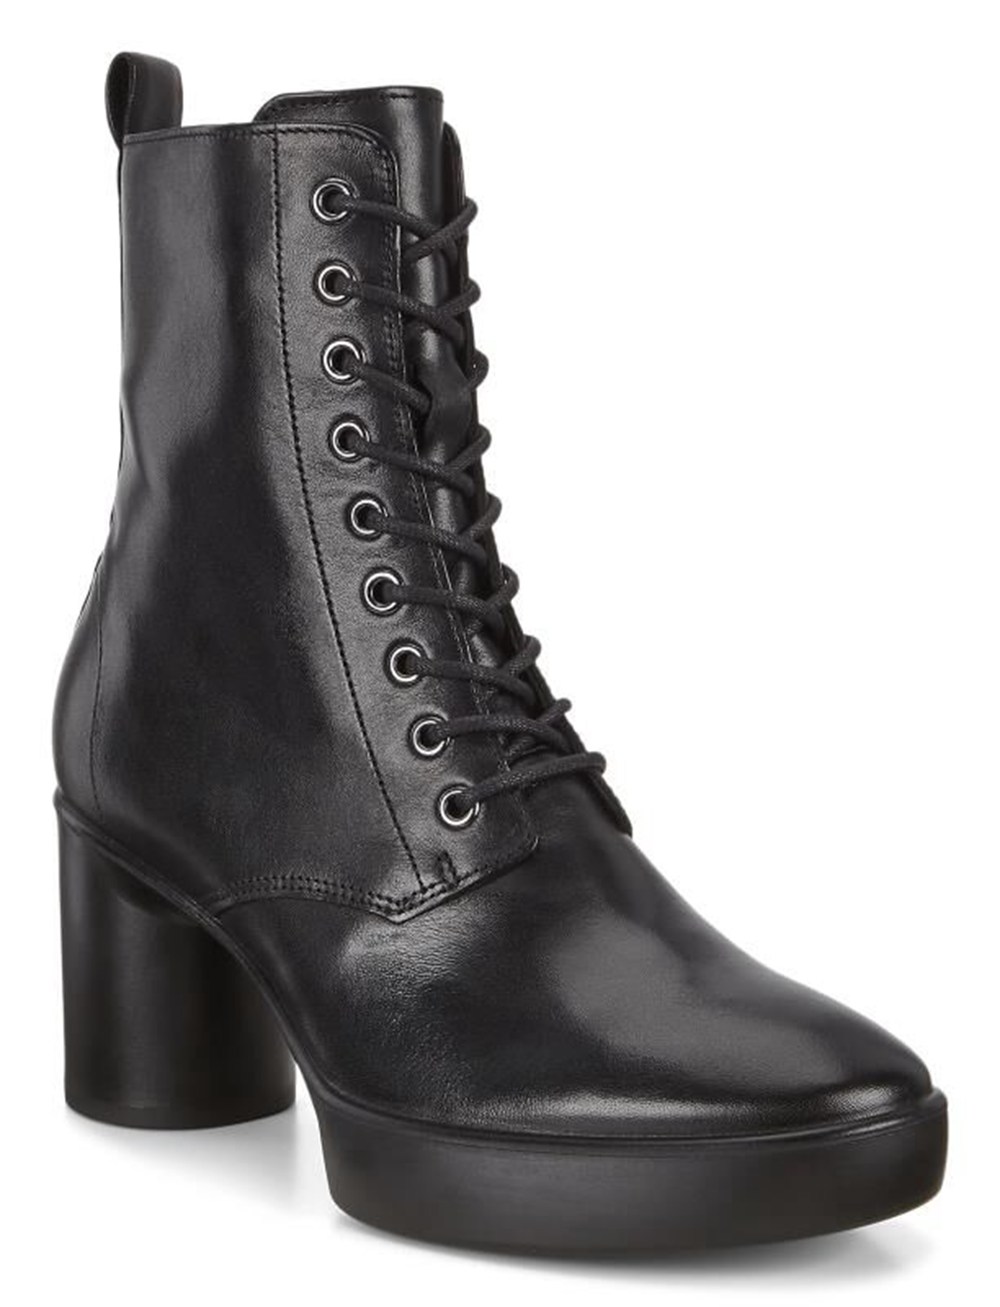 Womens Boots - ECCO Shape Sculpted Motion 55 Lace-Up - Black - 7365UTHCV